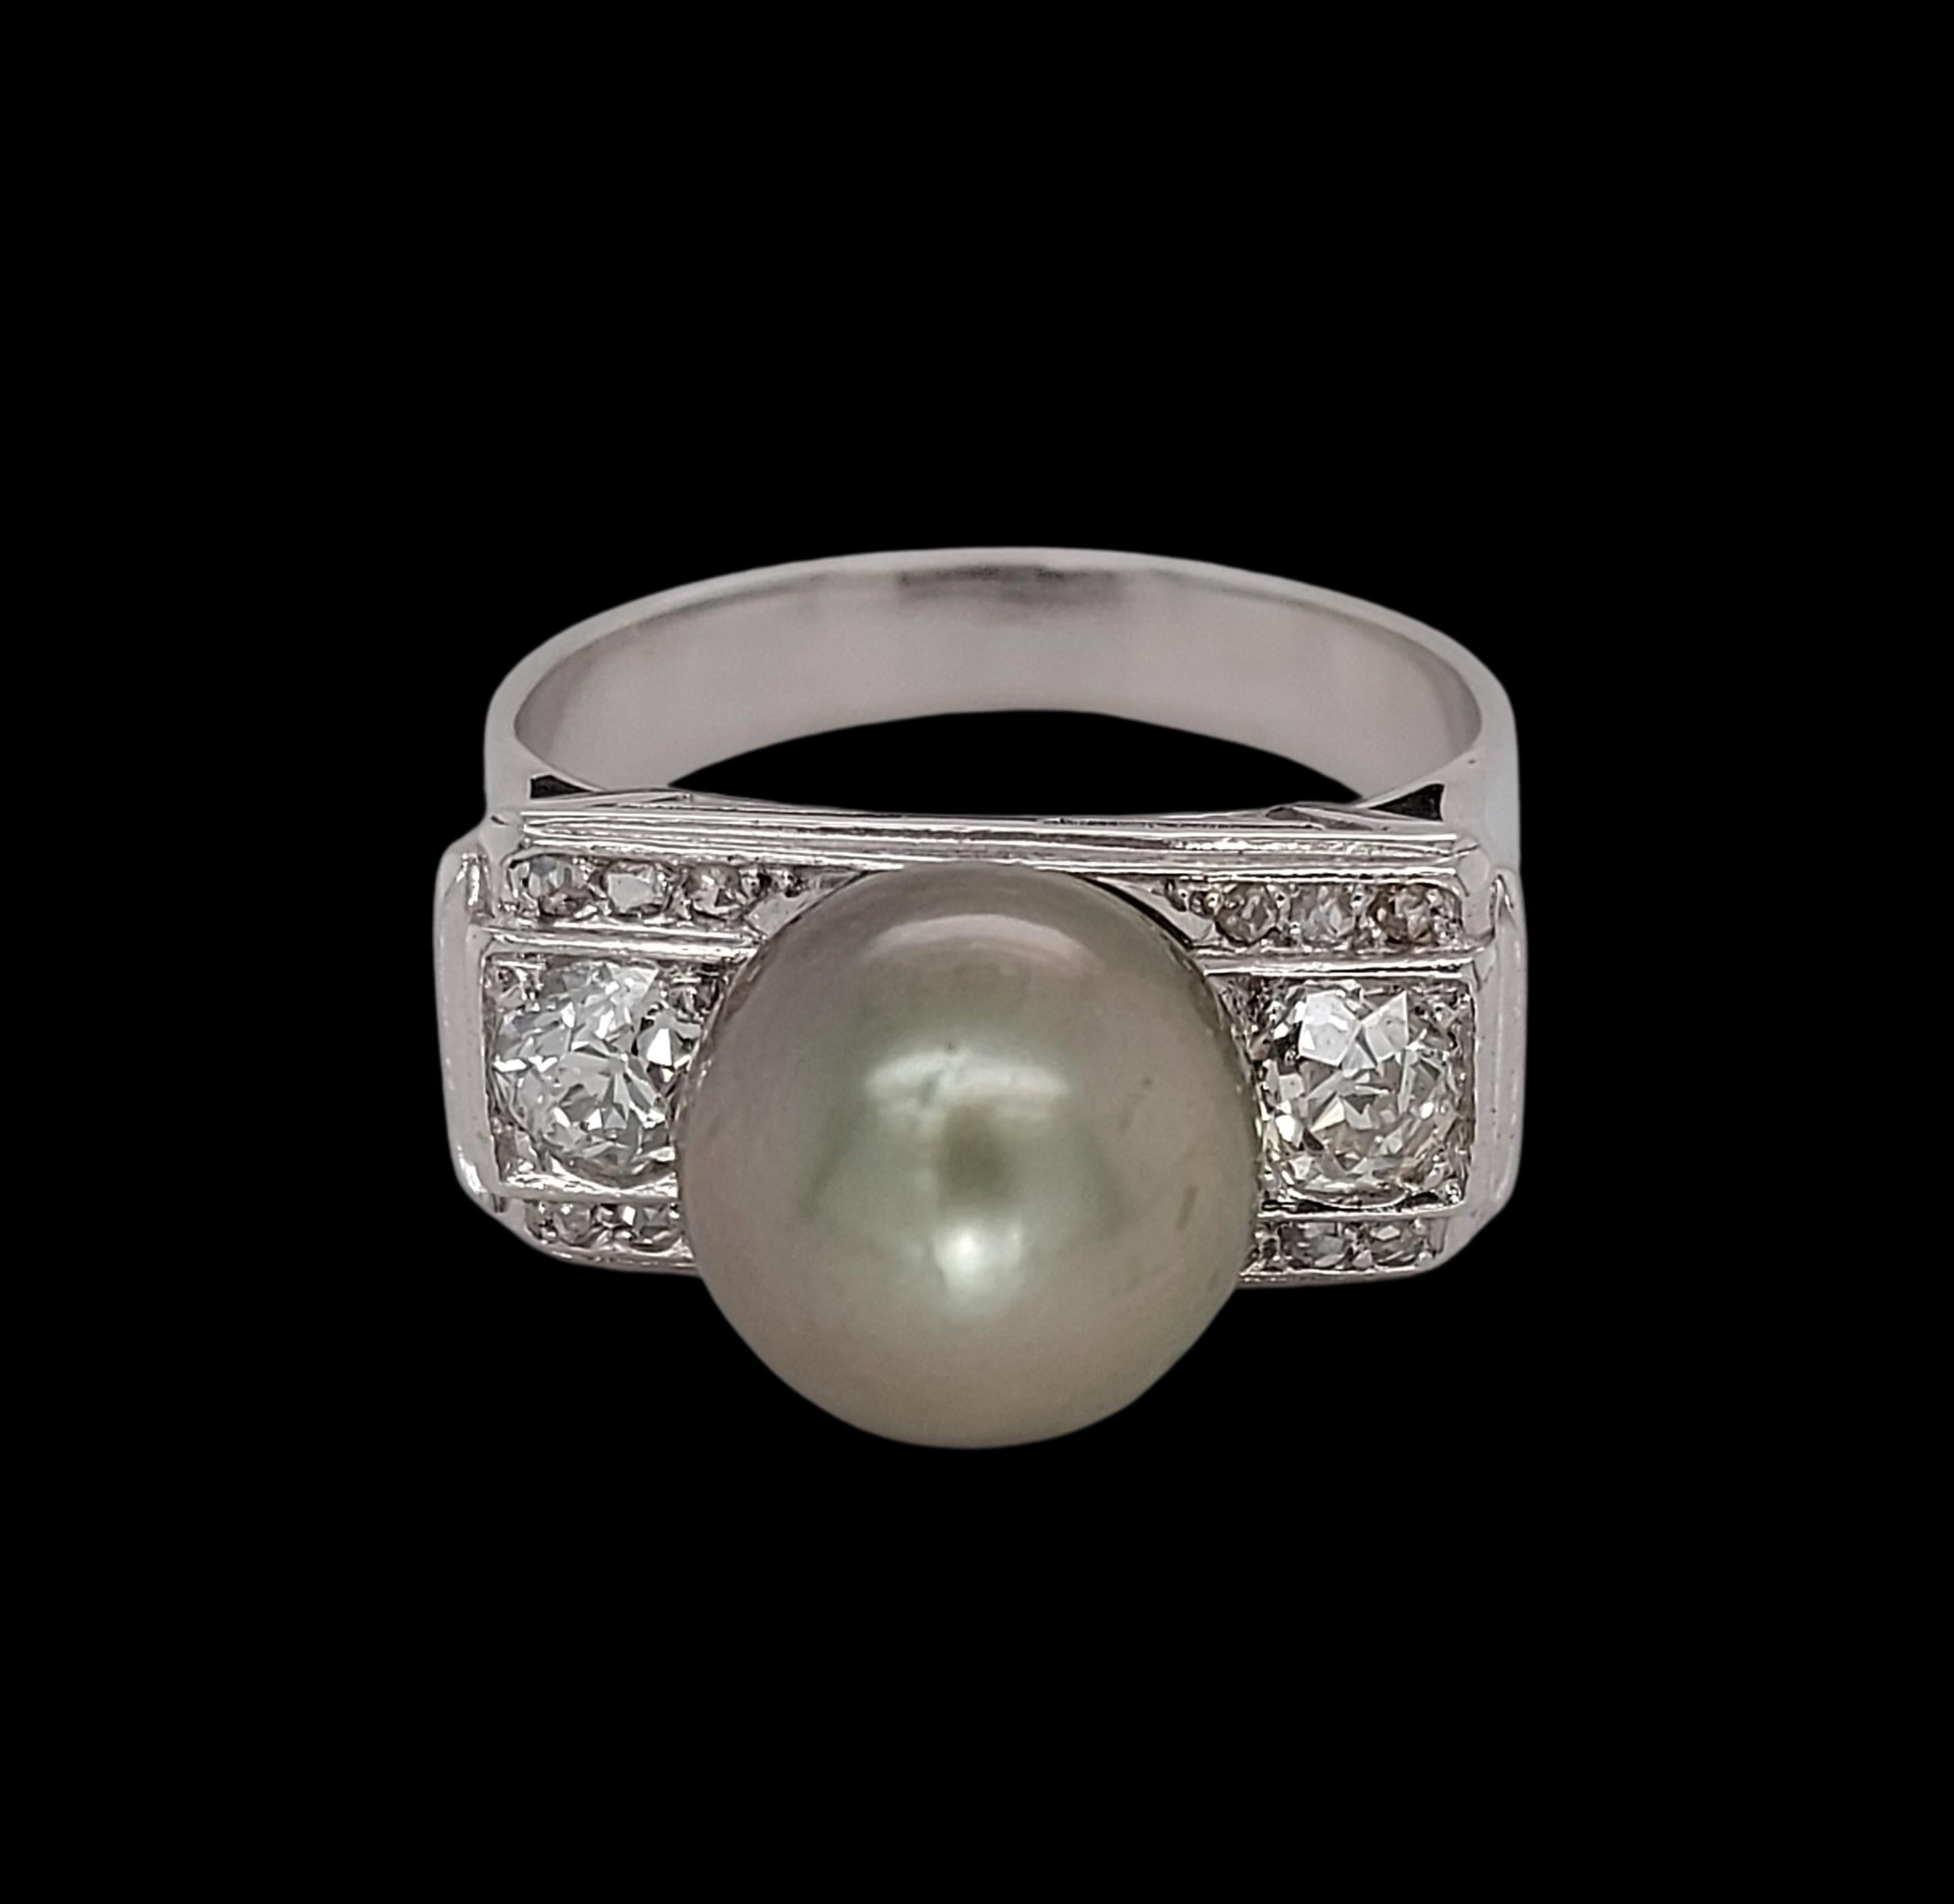 Gorgeous 18kt White Gold Ring With Green Tahiti Pearl and 0.5ct Old Mine Cut Diamonds

Diamonds: Old Mine cut diamonds & Rose Cut Diamonds , together approx. 0.50ct

Pearl: Green pearl ca. 10 mm

Material: 18kt white gold

Ring size: 53.8 EU / 6.75